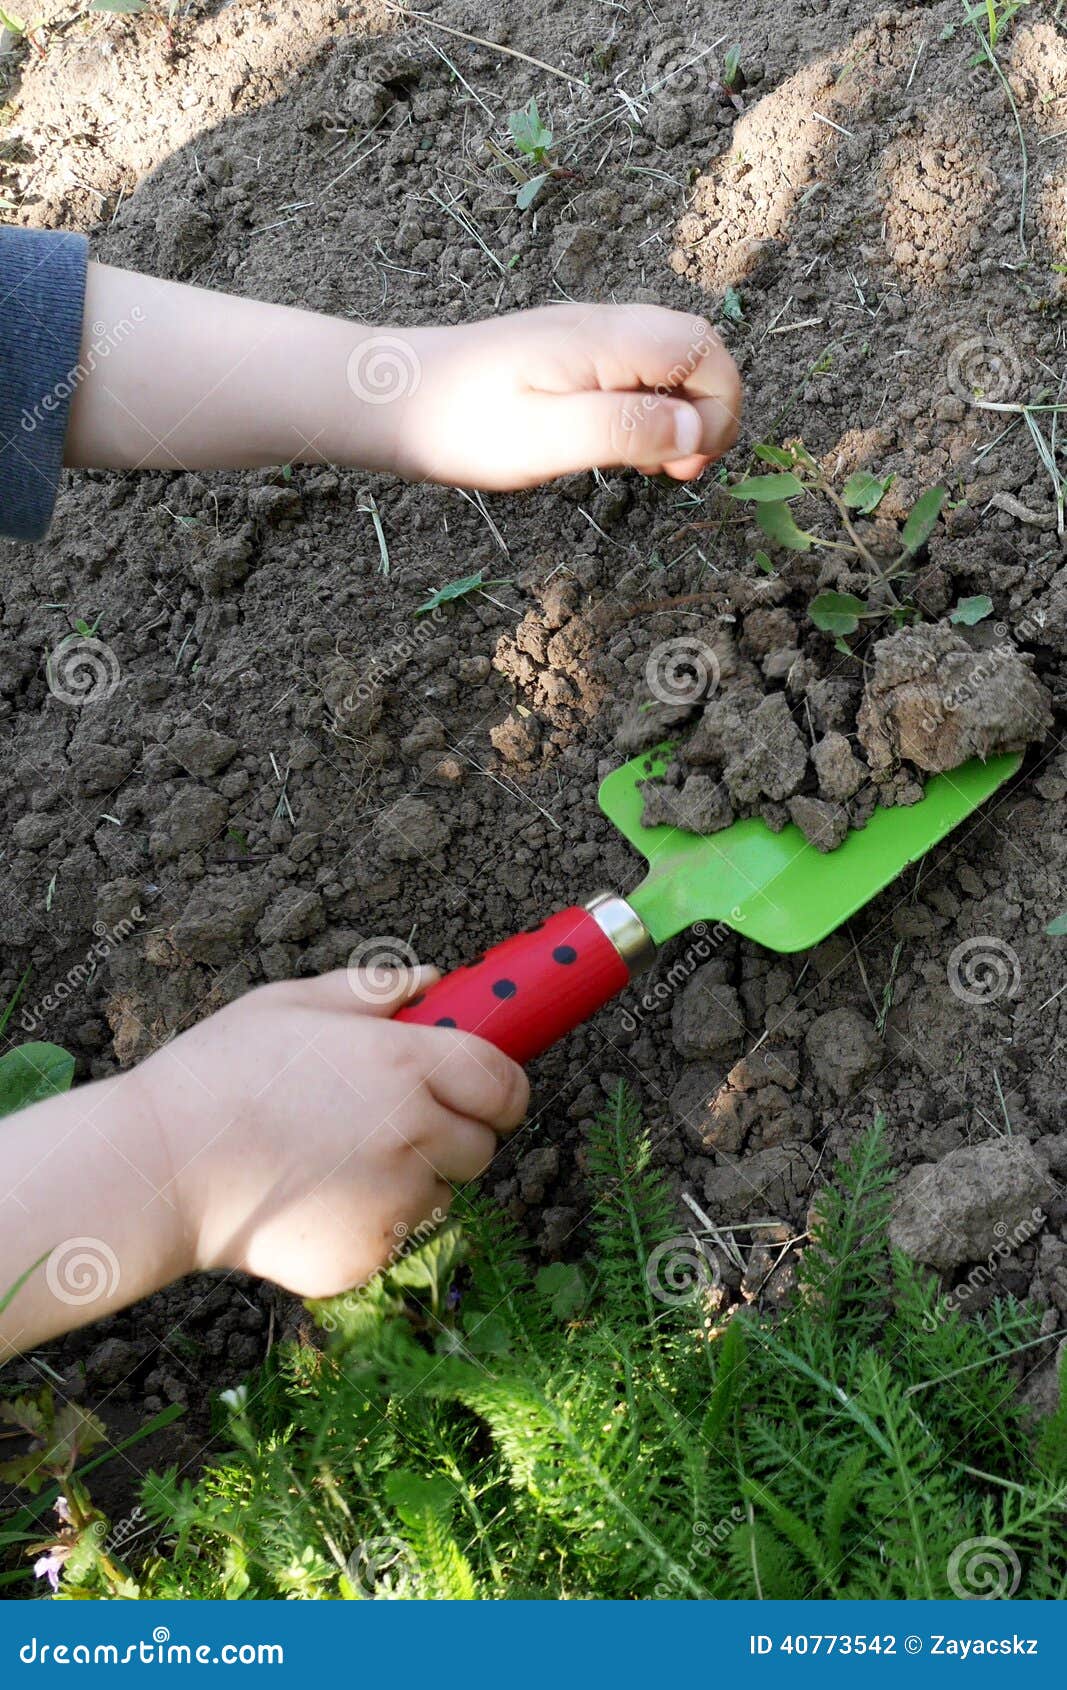 underholdning Tilbageholde ego Child Removing Weed in Garden with Toy Shovel Stock Photo - Image of left,  brown: 40773542